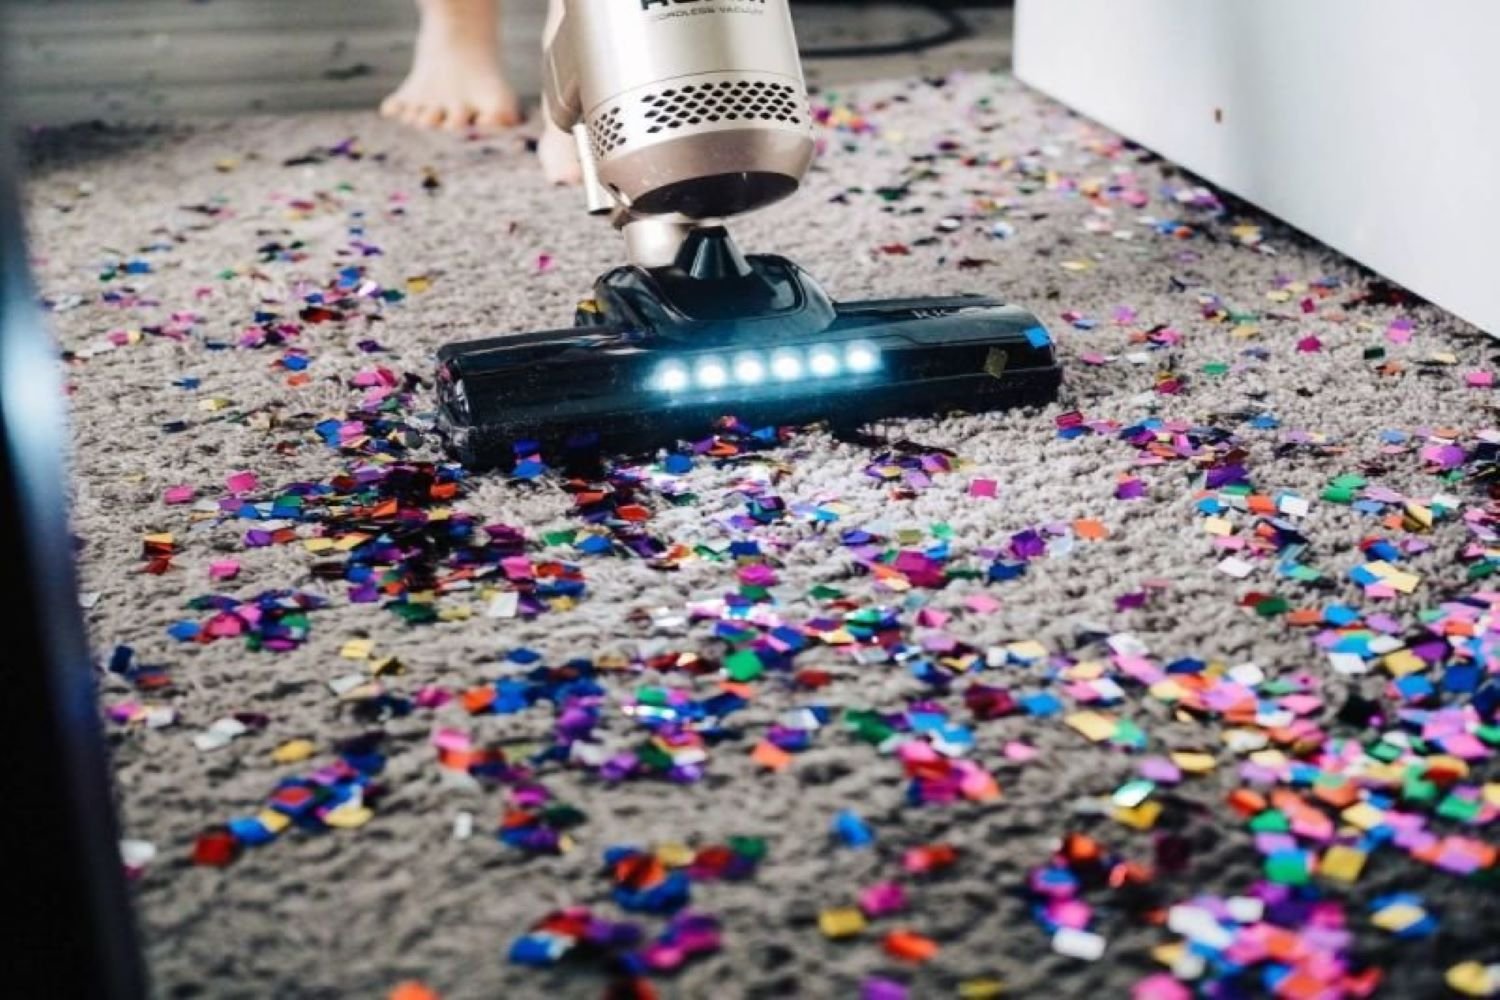 hoovering the floor covered in sparkles